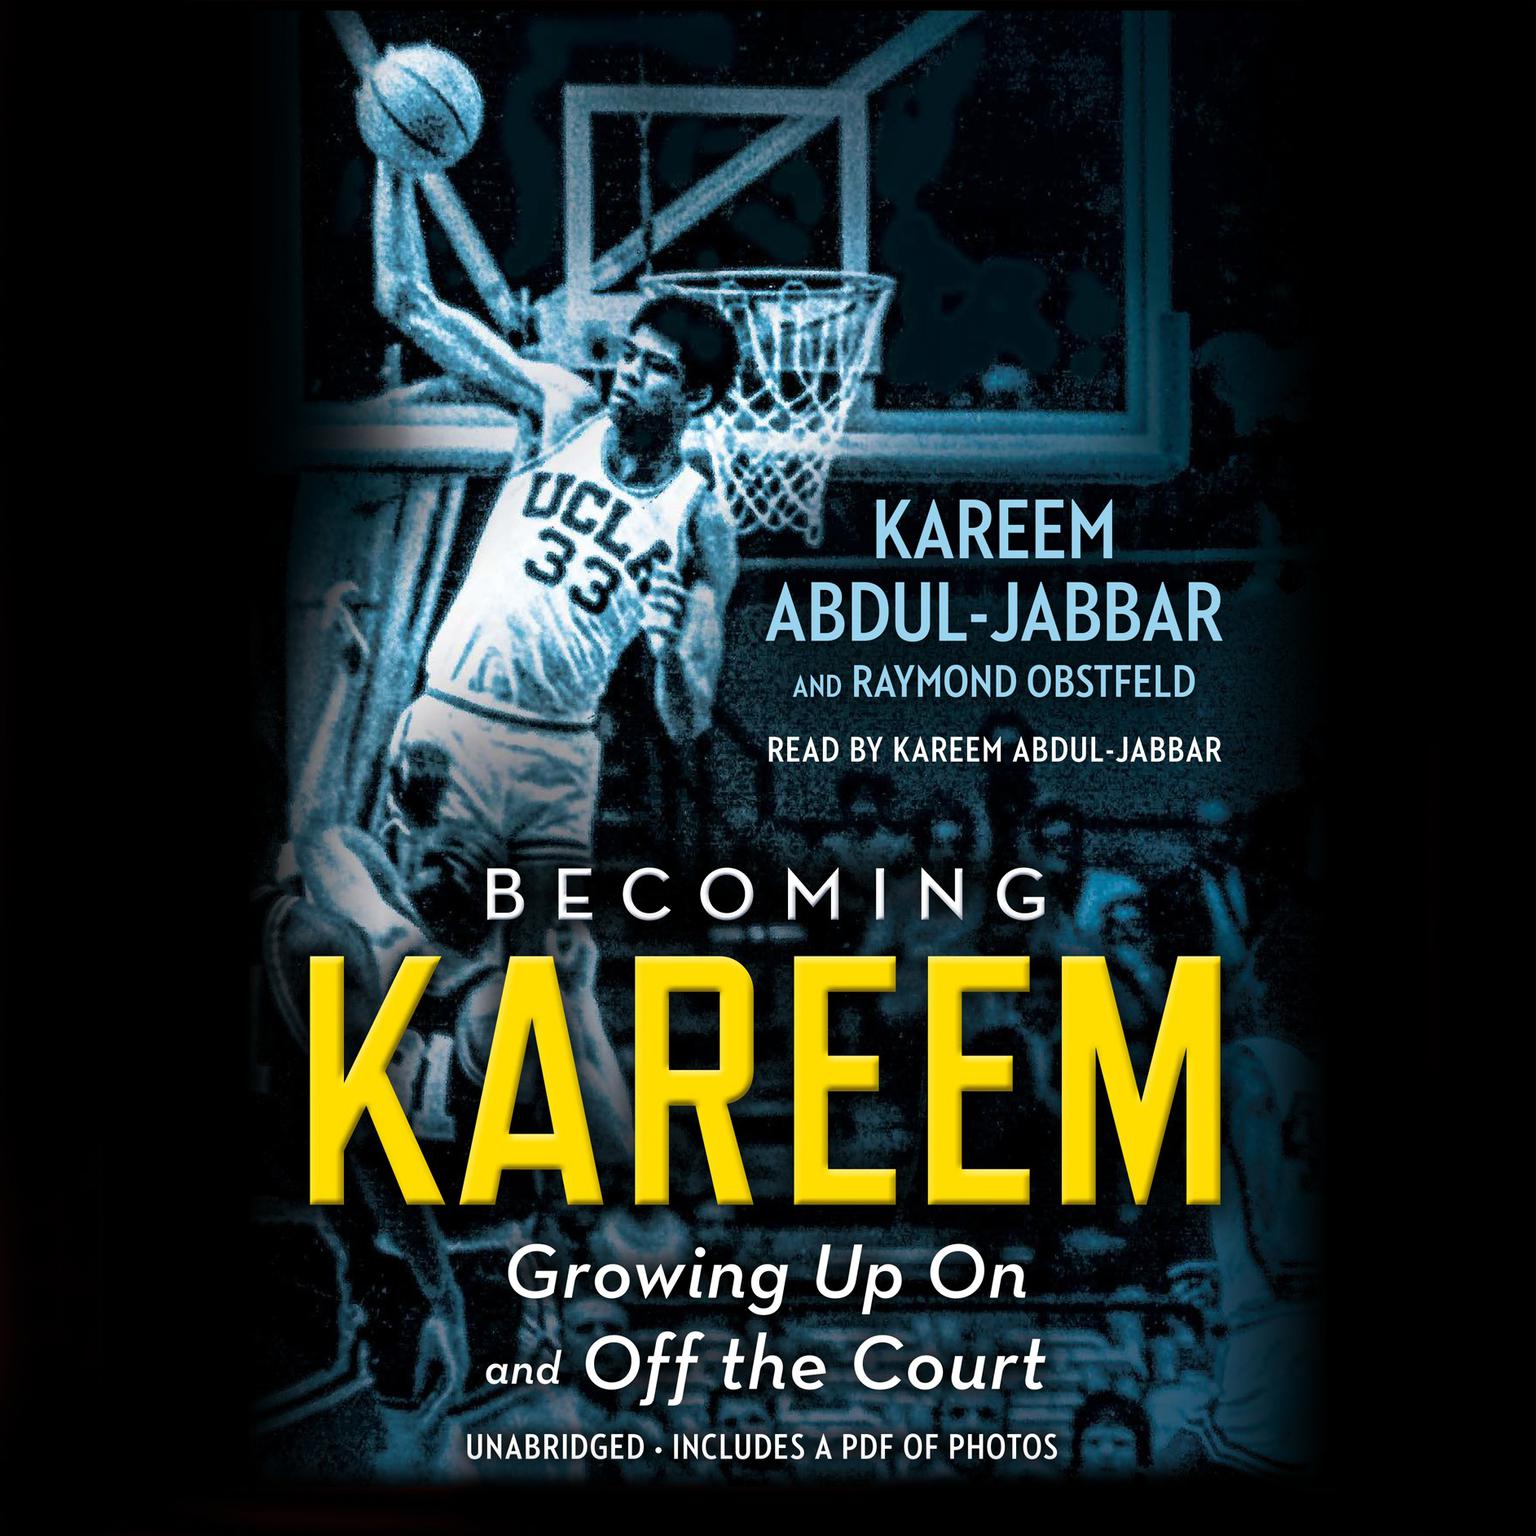 Becoming Kareem: Growing Up On and Off the Court Audiobook, by Kareem Abdul-Jabbar